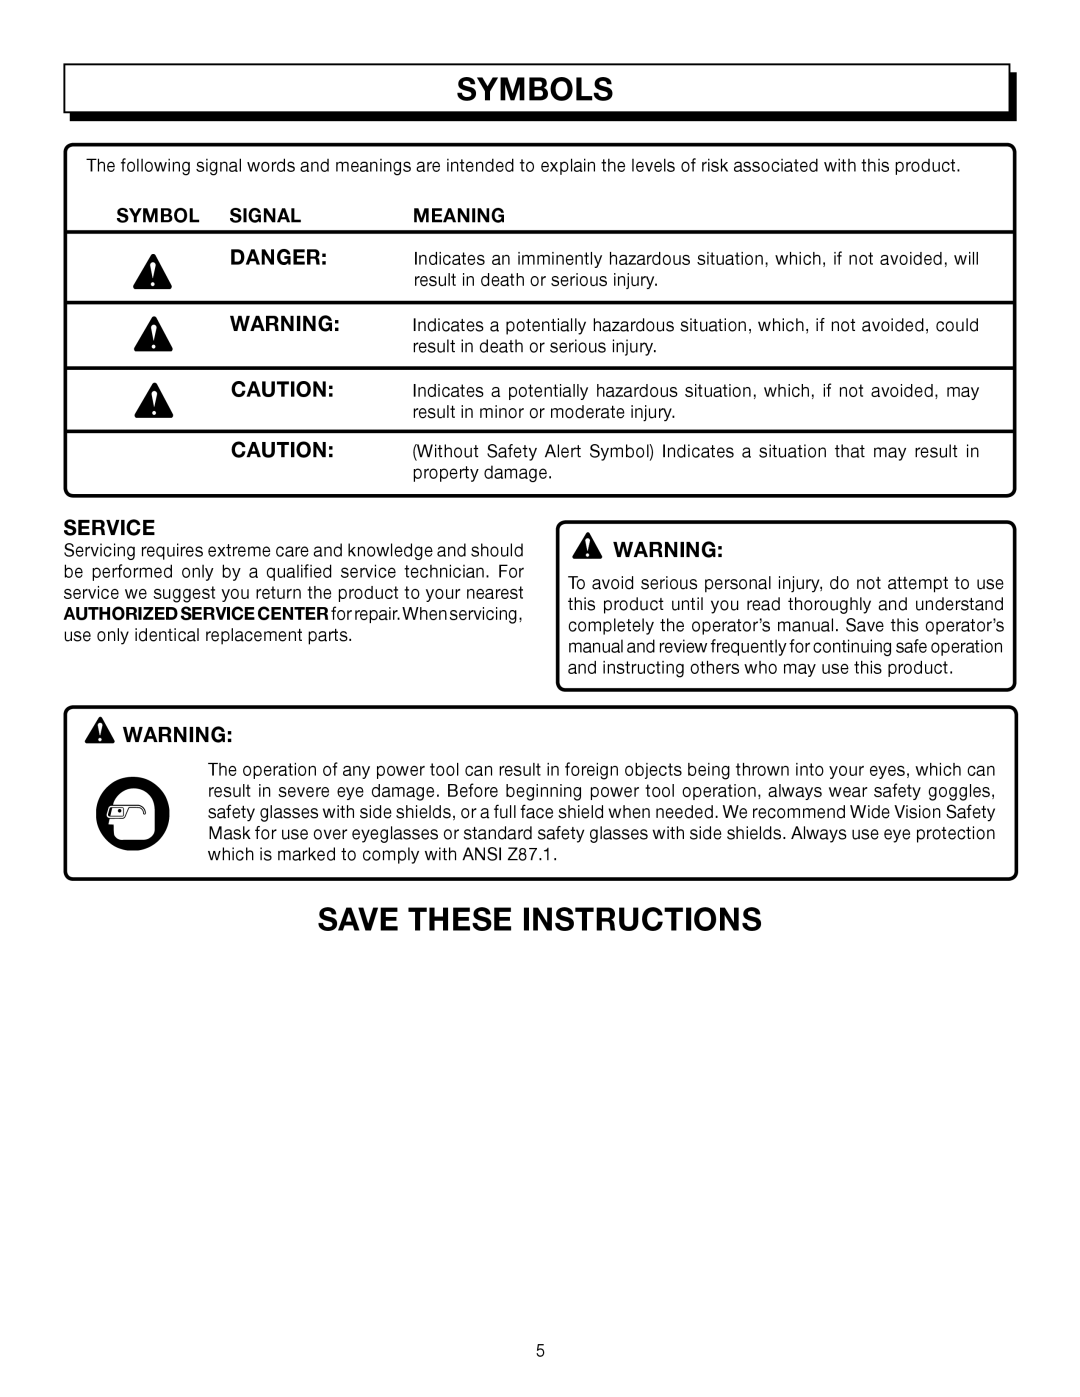 Homelite UT08512B manual Save These Instructions, Symbols, Service, Symbol Signal, Meaning 